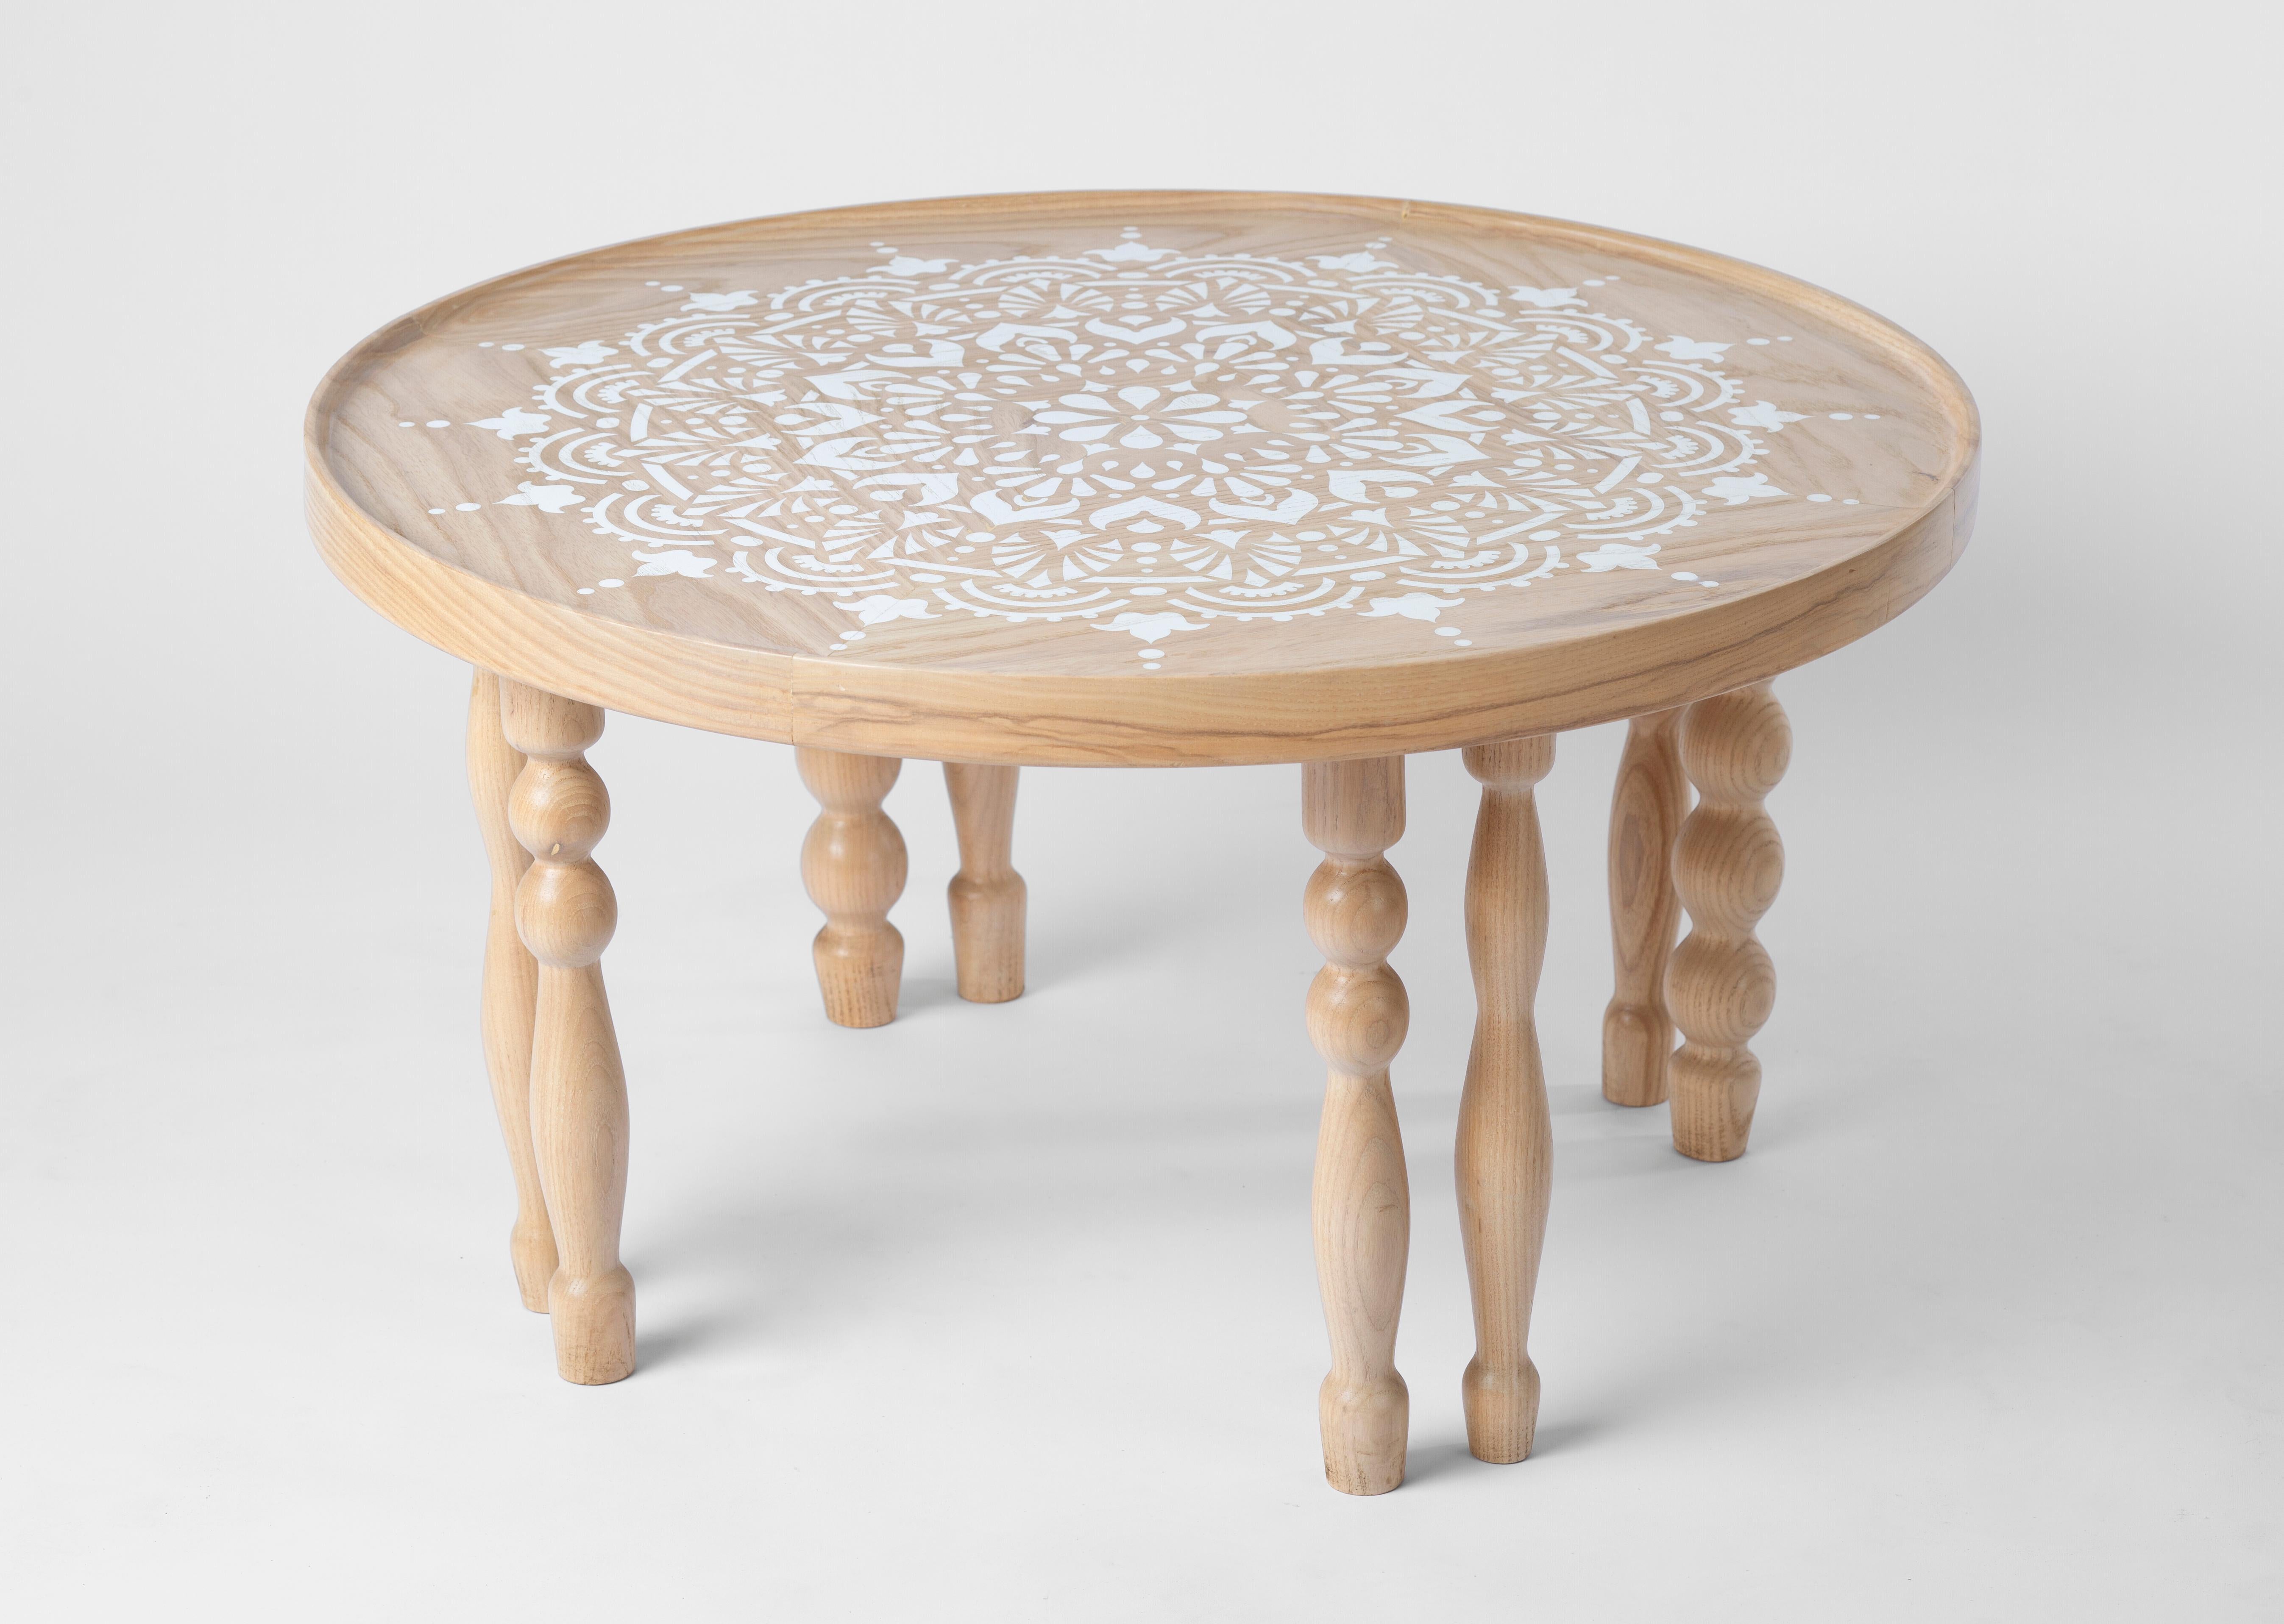 Modern Ash Wood Coffee Table with Arabesque-Inspired Legs & Stenciled Mandala Motif For Sale